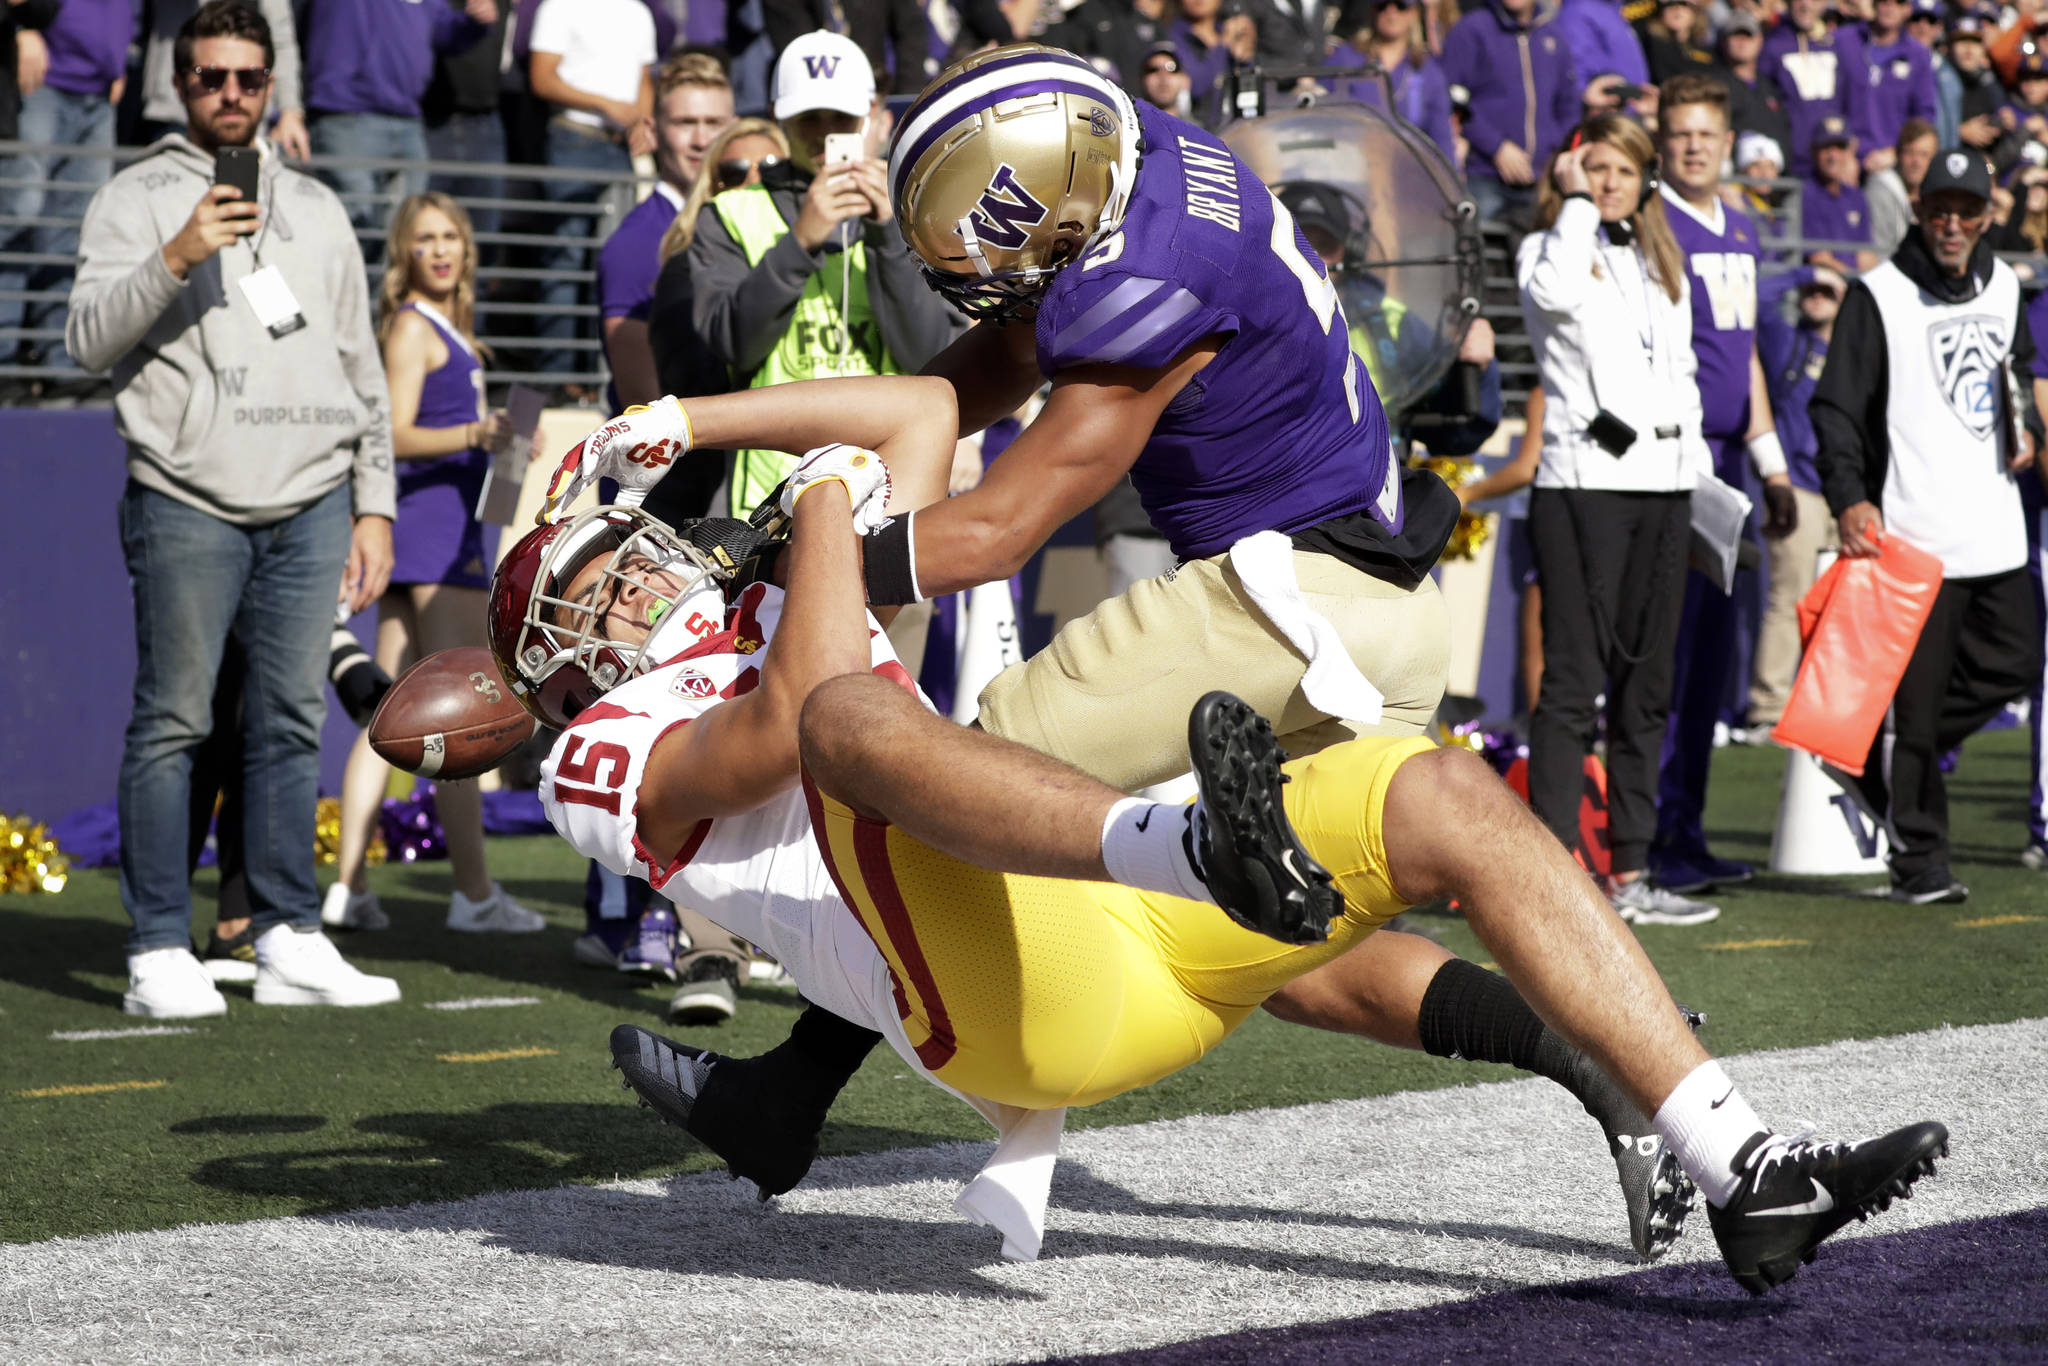 Washington defensive back Myles Bryant (right) breaks up a pass in the end zone during the fourth quarter of the Huskies’ 28-14 win over USC on Saturday at Husky Stadium. (Elaine Thompson / Associated Press)